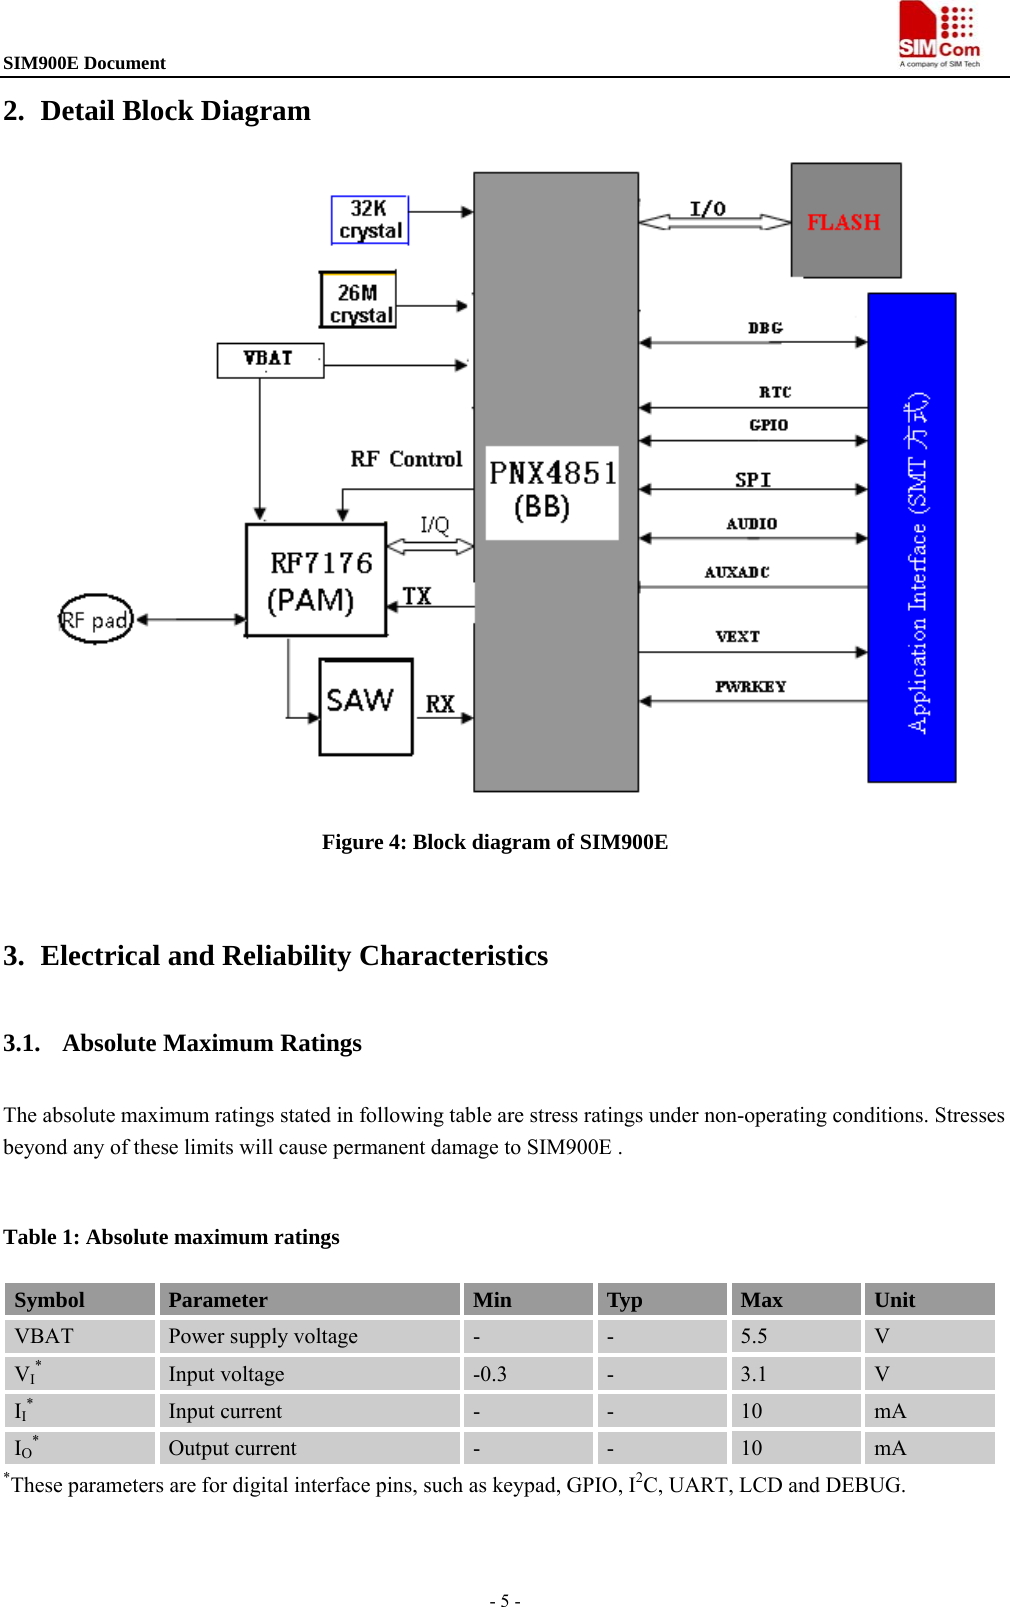 SIM900E Document                                                                                   - 5 - 2. Detail Block Diagram  Figure 4: Block diagram of SIM900E     3. Electrical and Reliability Characteristics 3.1. Absolute Maximum Ratings The absolute maximum ratings stated in following table are stress ratings under non-operating conditions. Stresses beyond any of these limits will cause permanent damage to SIM900E .  Table 1: Absolute maximum ratings Symbol  Parameter  Min  Typ  Max  Unit VBAT  Power supply voltage  -  -  5.5  V VI* Input voltage  -0.3  -  3.1  V II* Input current  -  -  10  mA IO* Output current  -  -  10  mA *These parameters are for digital interface pins, such as keypad, GPIO, I2C, UART, LCD and DEBUG. 